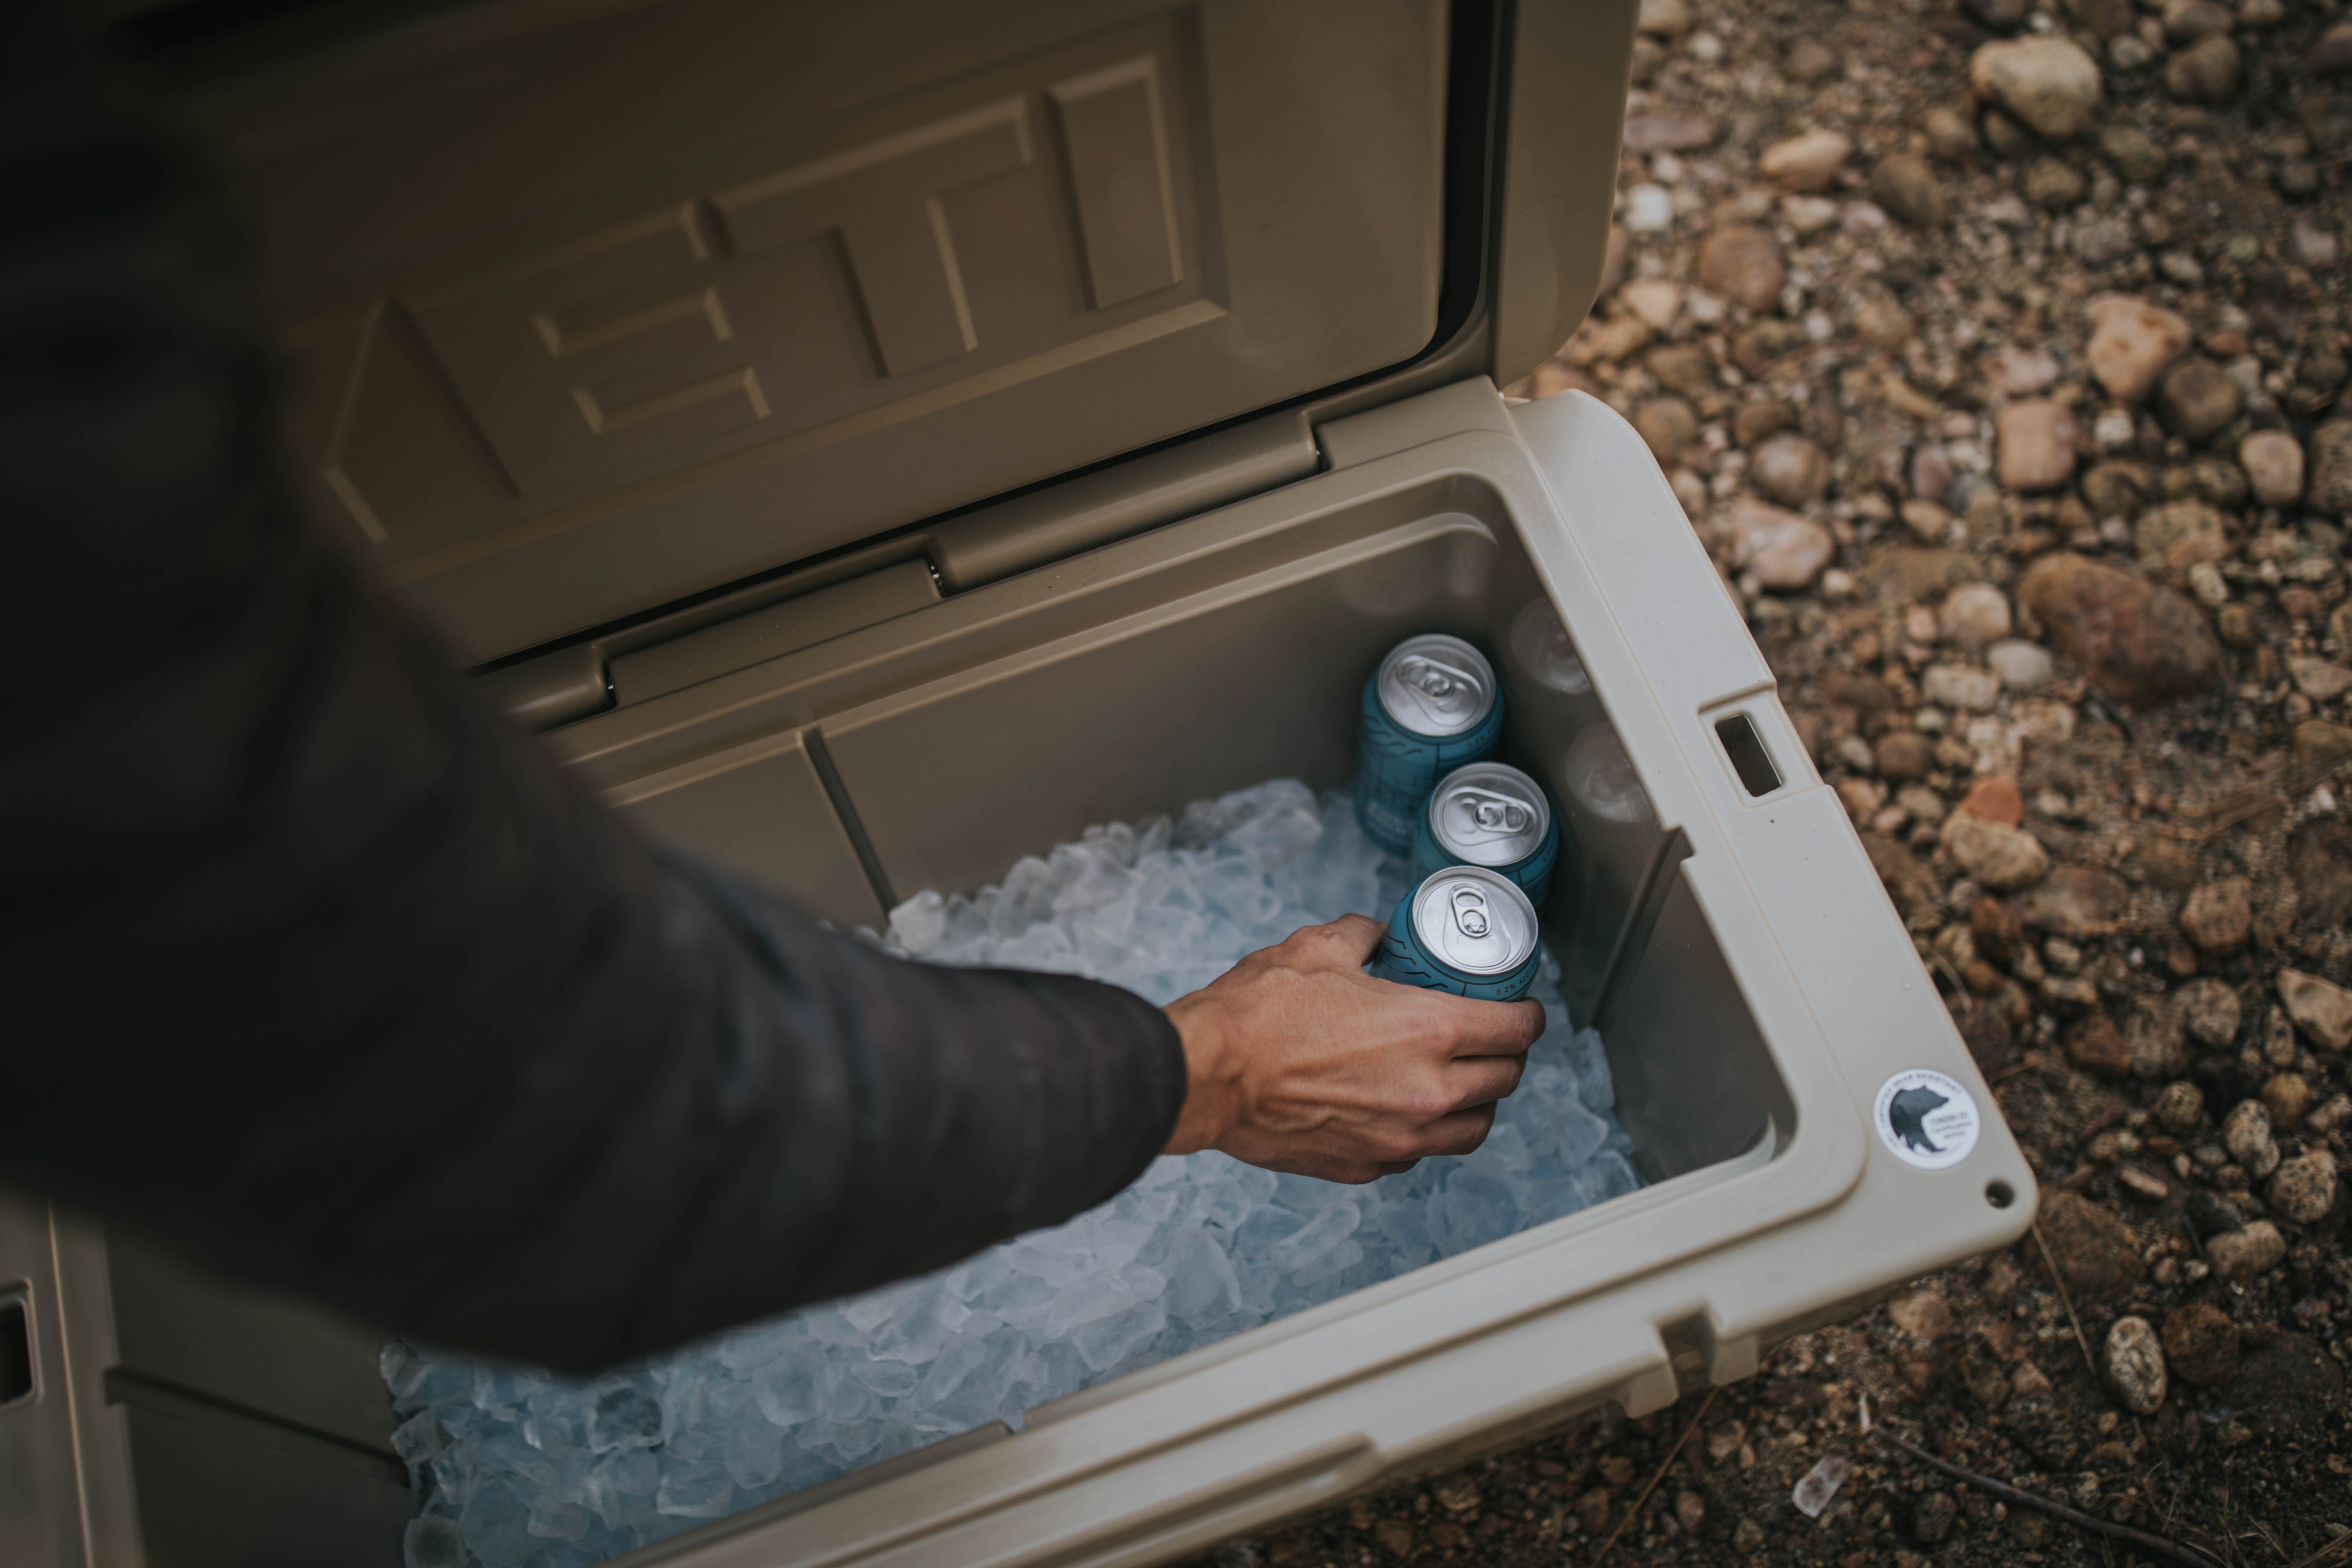 How to choose a camping cooler?